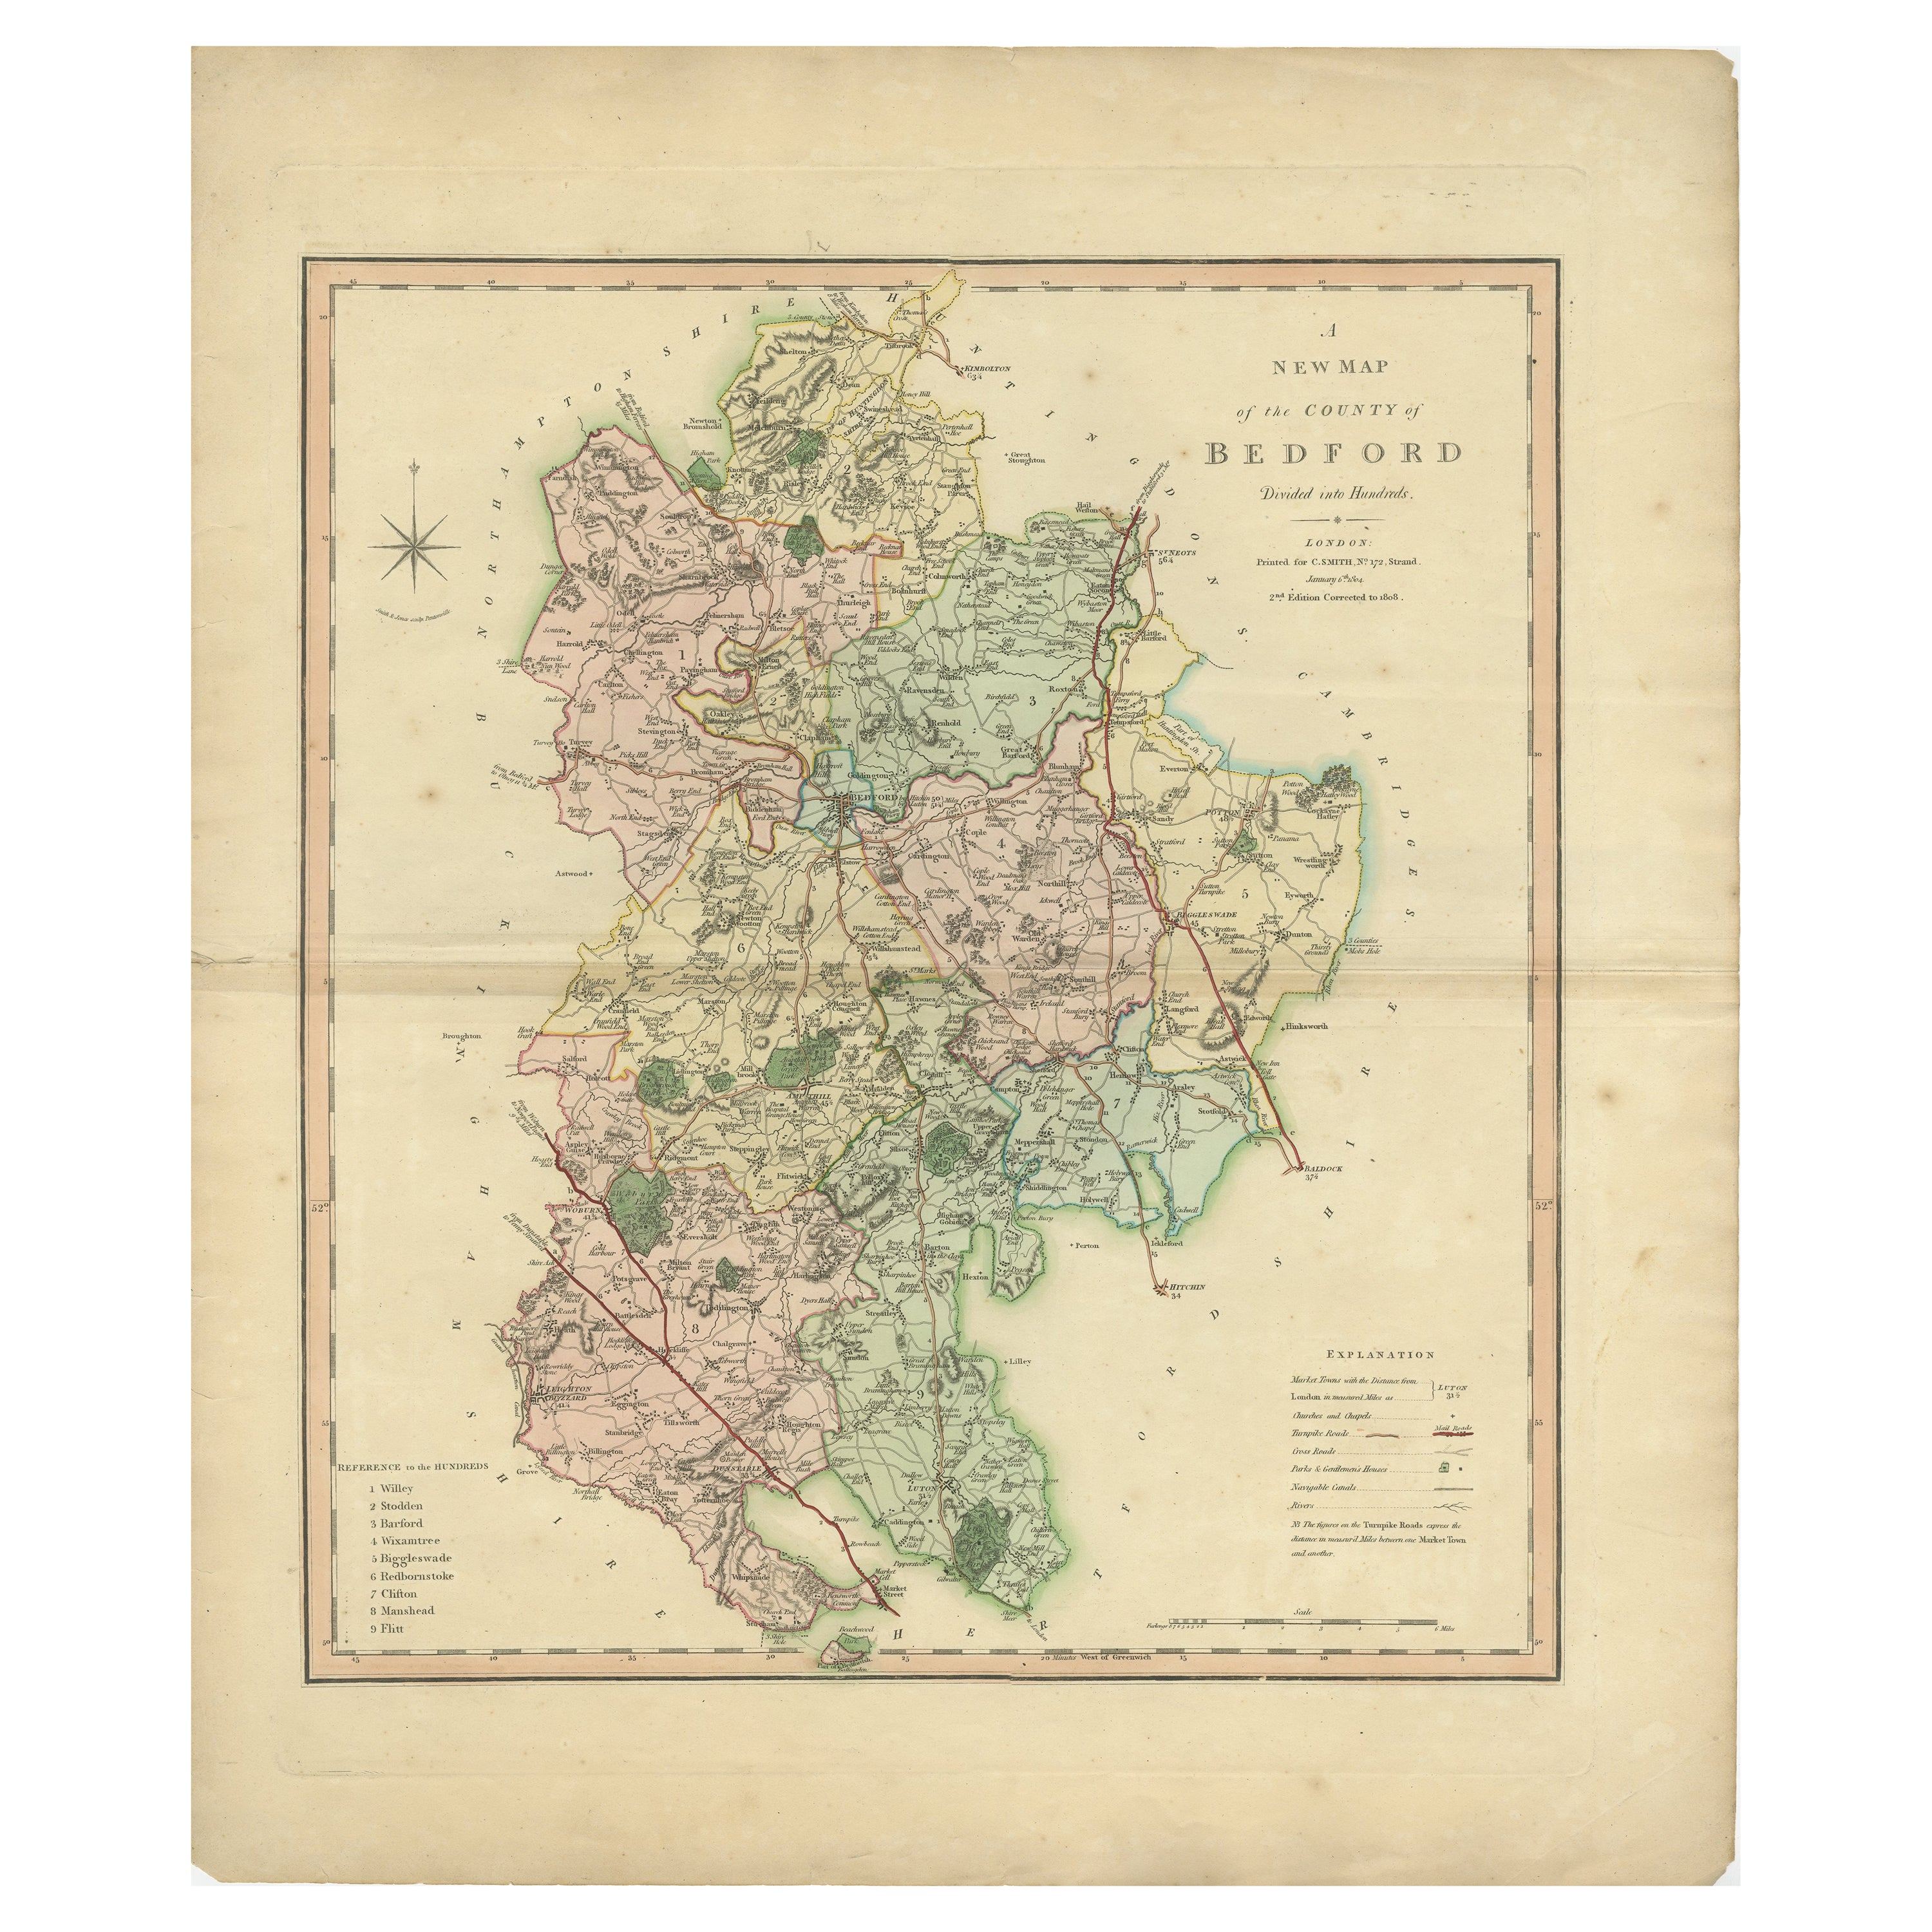 Antique Colourful and Decorative County Map of Bedfordshire, England, 1804